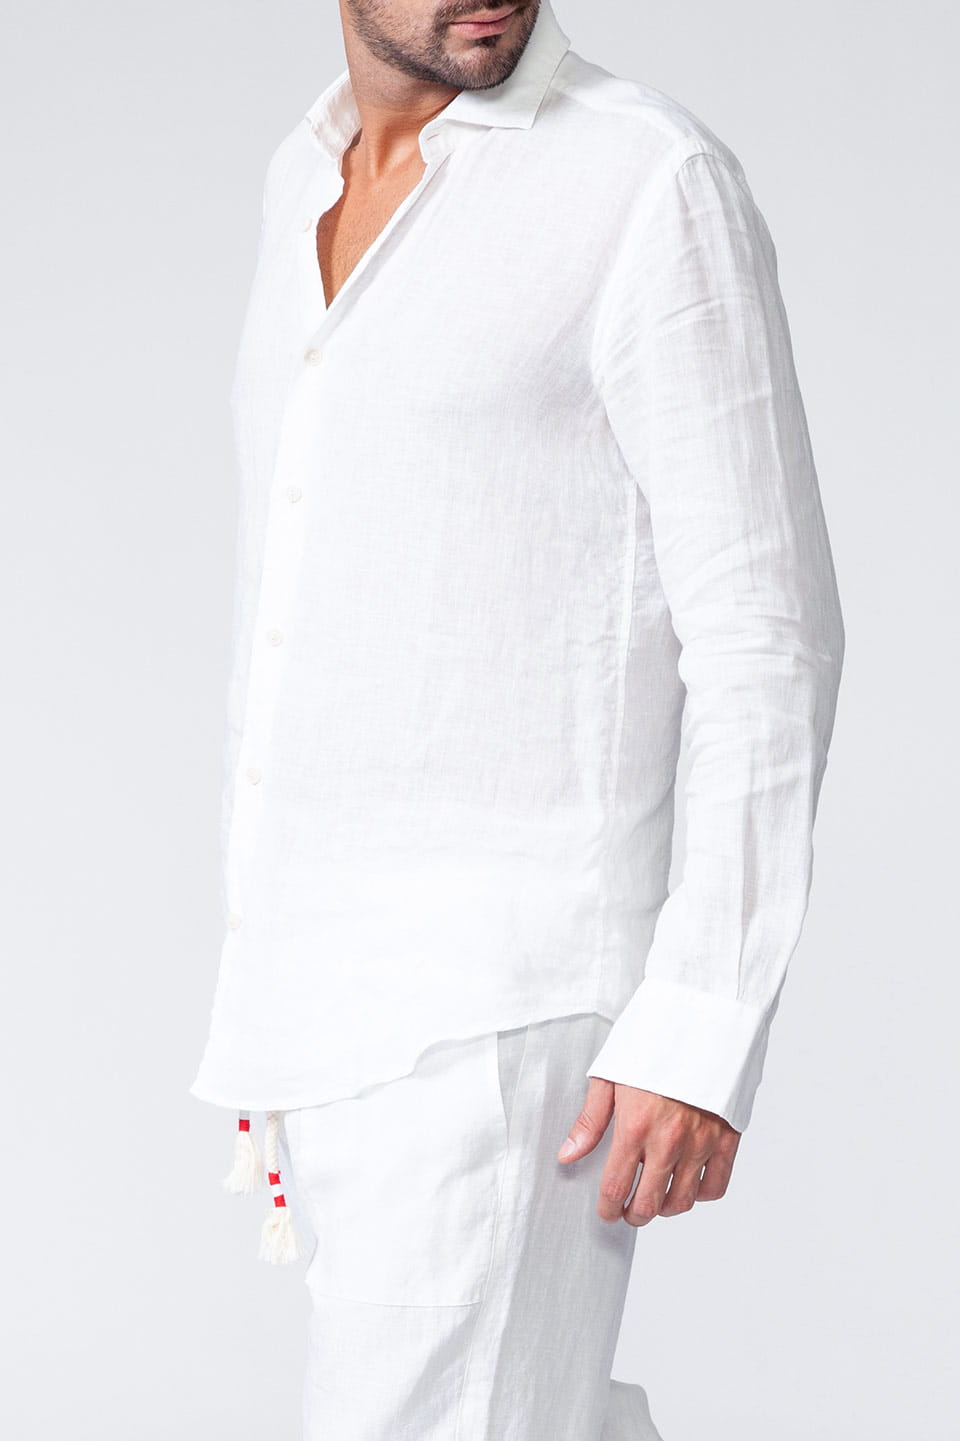 Thumbnail for Product gallery 2, MC saint barth male pamplona shirt white side